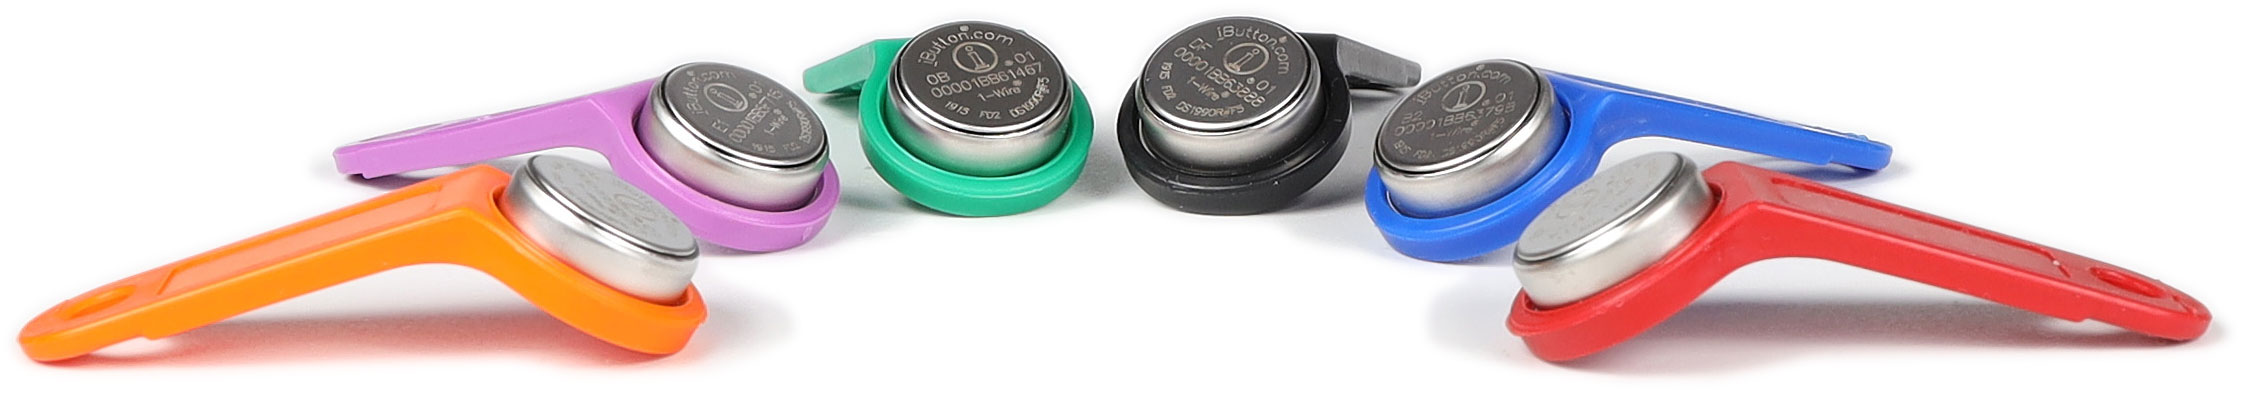 iButtons with keyring mounts (fob) in various colours